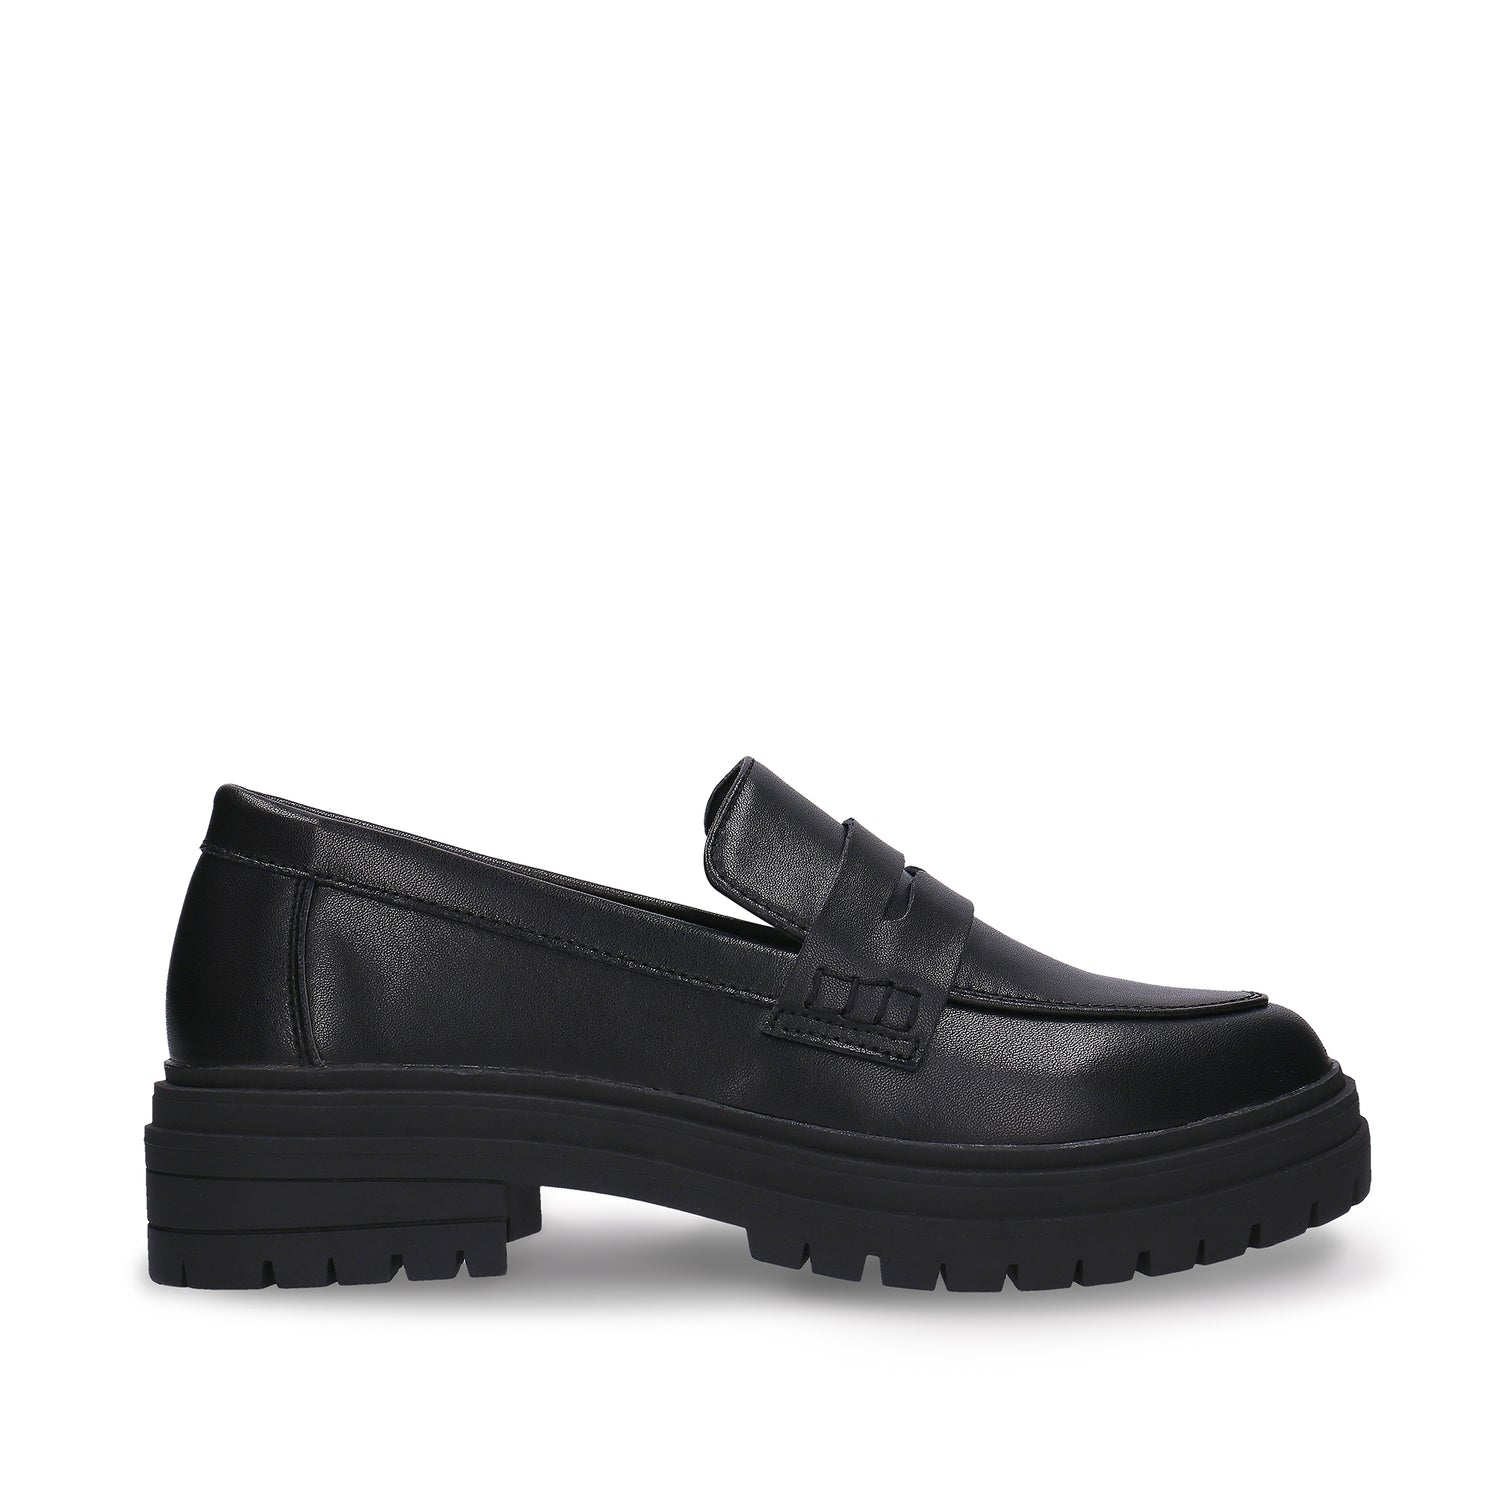 Fiore Black Vegan Loafer Chunky Sole